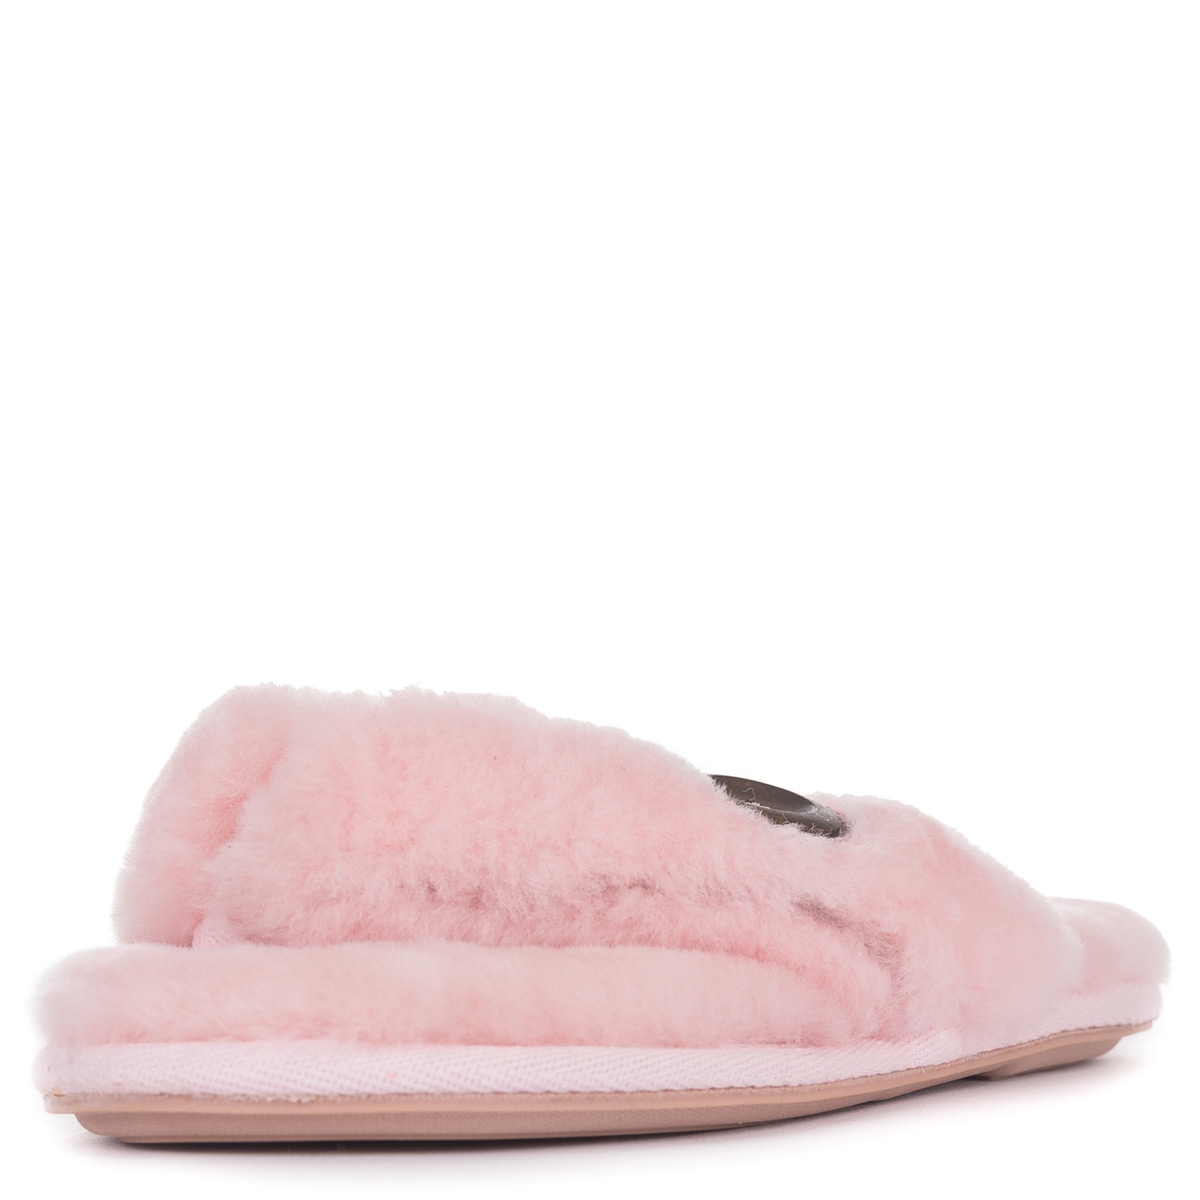 Keira Sheepskin Thong Slippers – Small – Soft Pink – Women’s – Bedroom Athletics